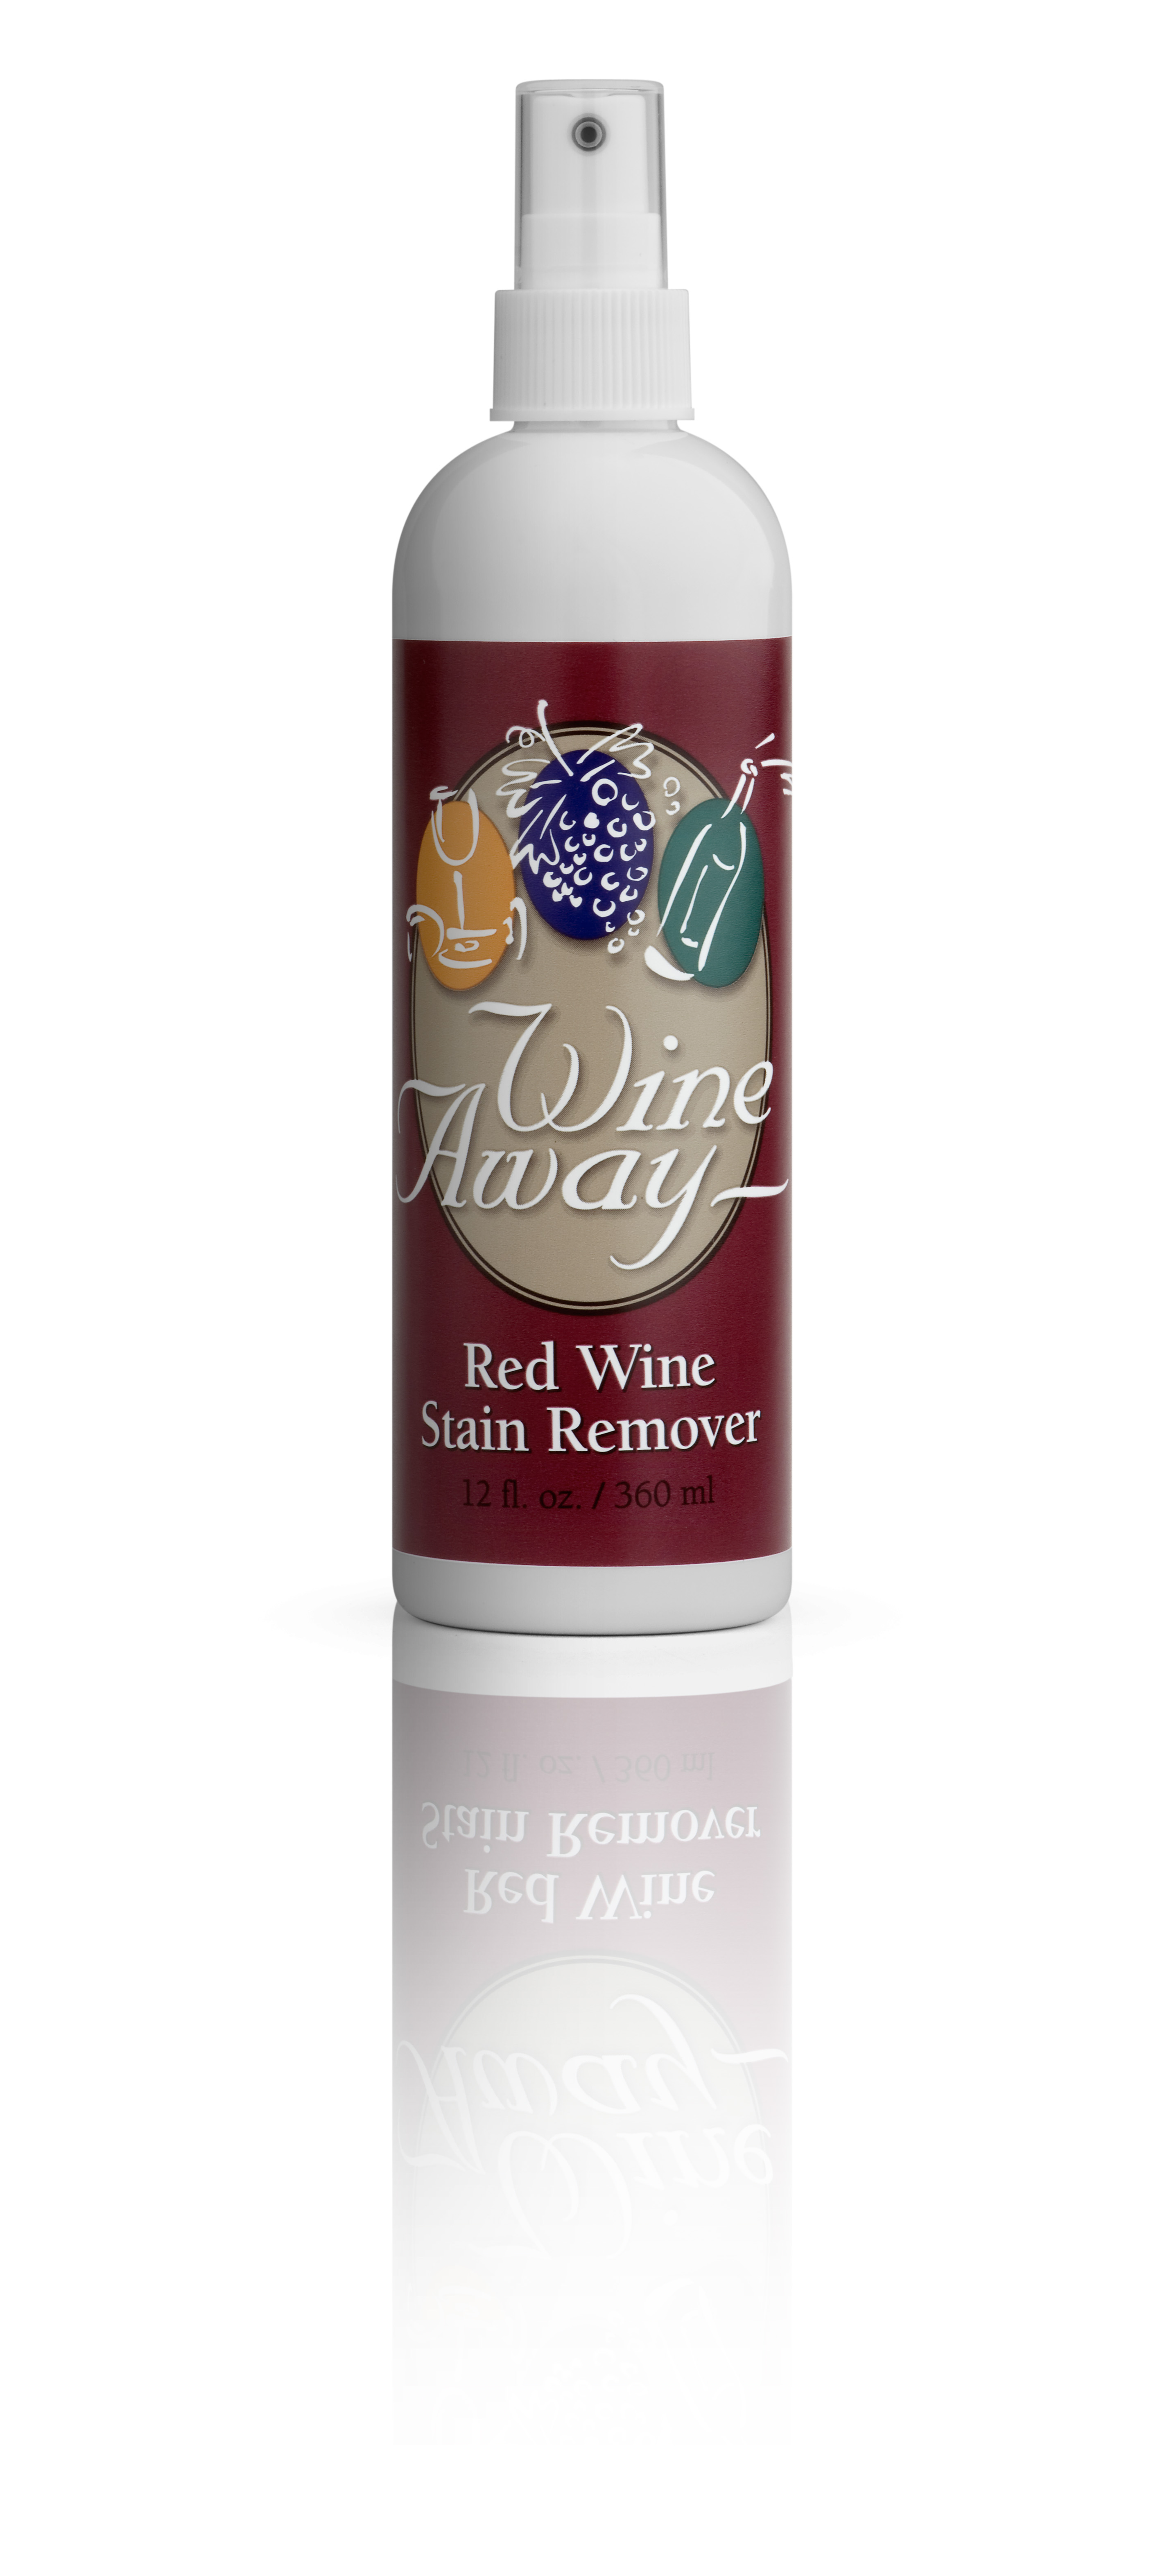 Evergreen Labs Wine Away Red Wine Stain Remover, 12 Fluid Ounce - image 1 of 3